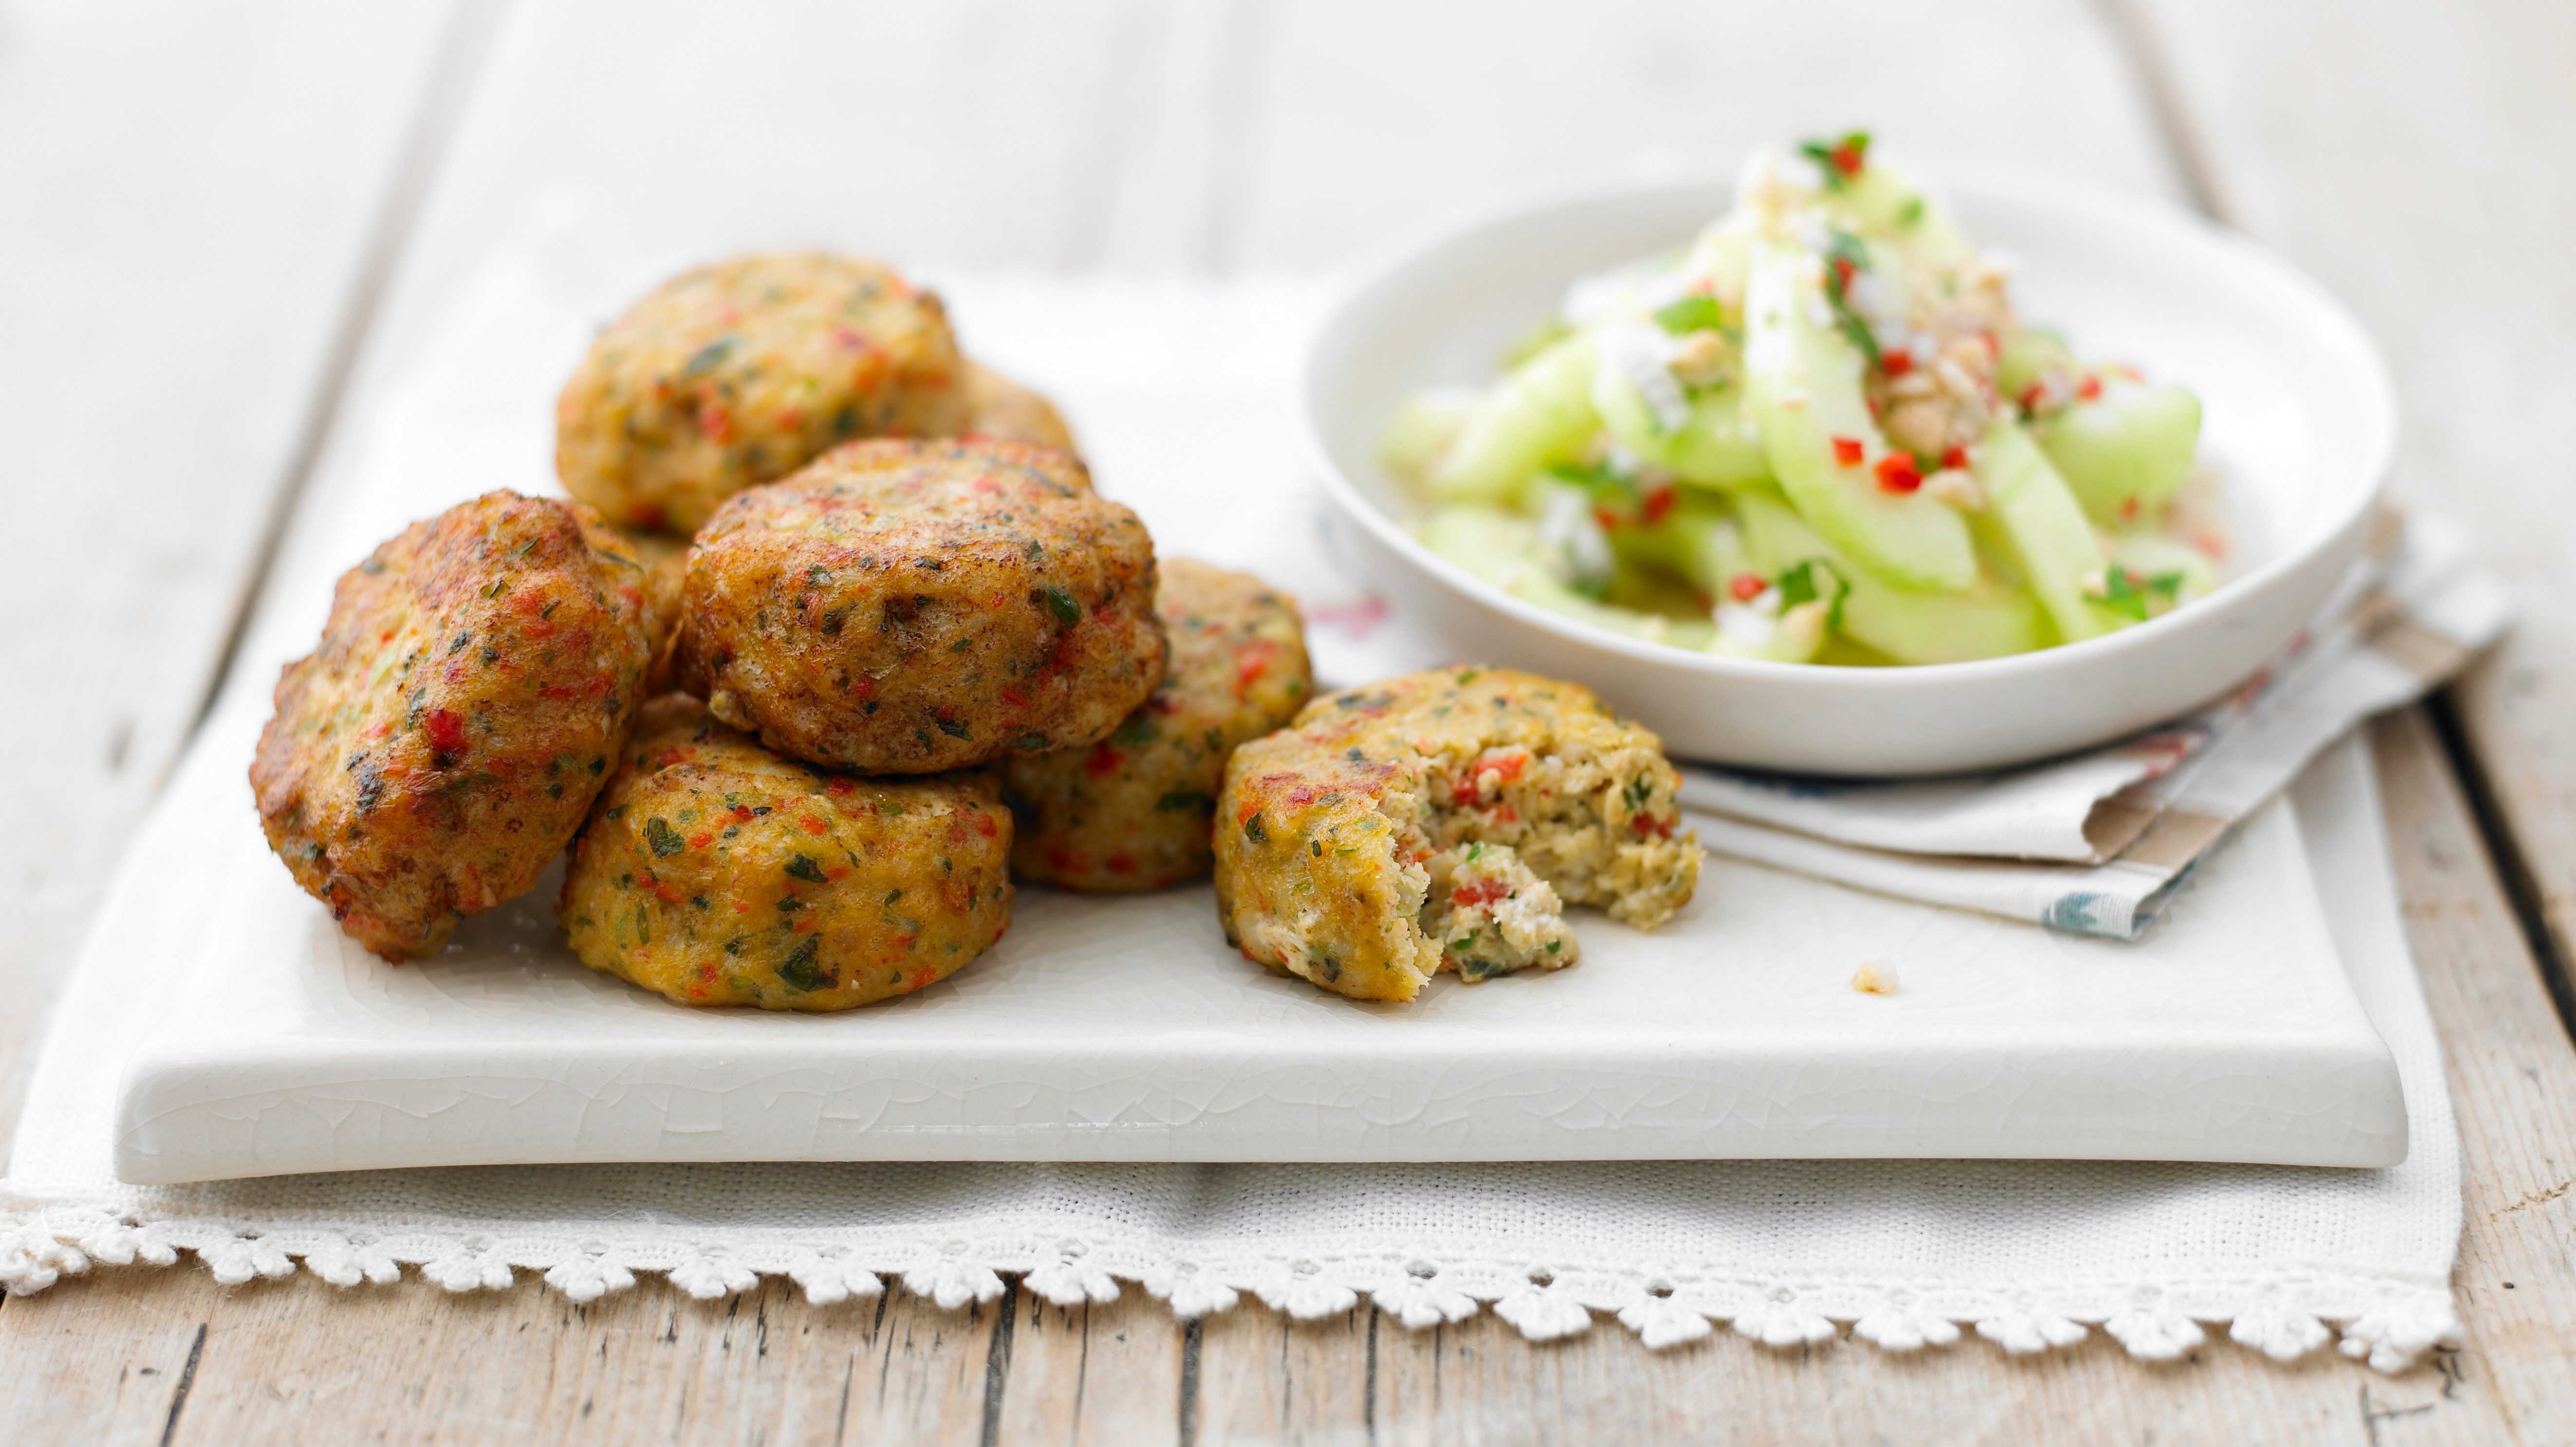 Easy Thai Fish Cakes Inspired by Masterchef - Searching for Spice